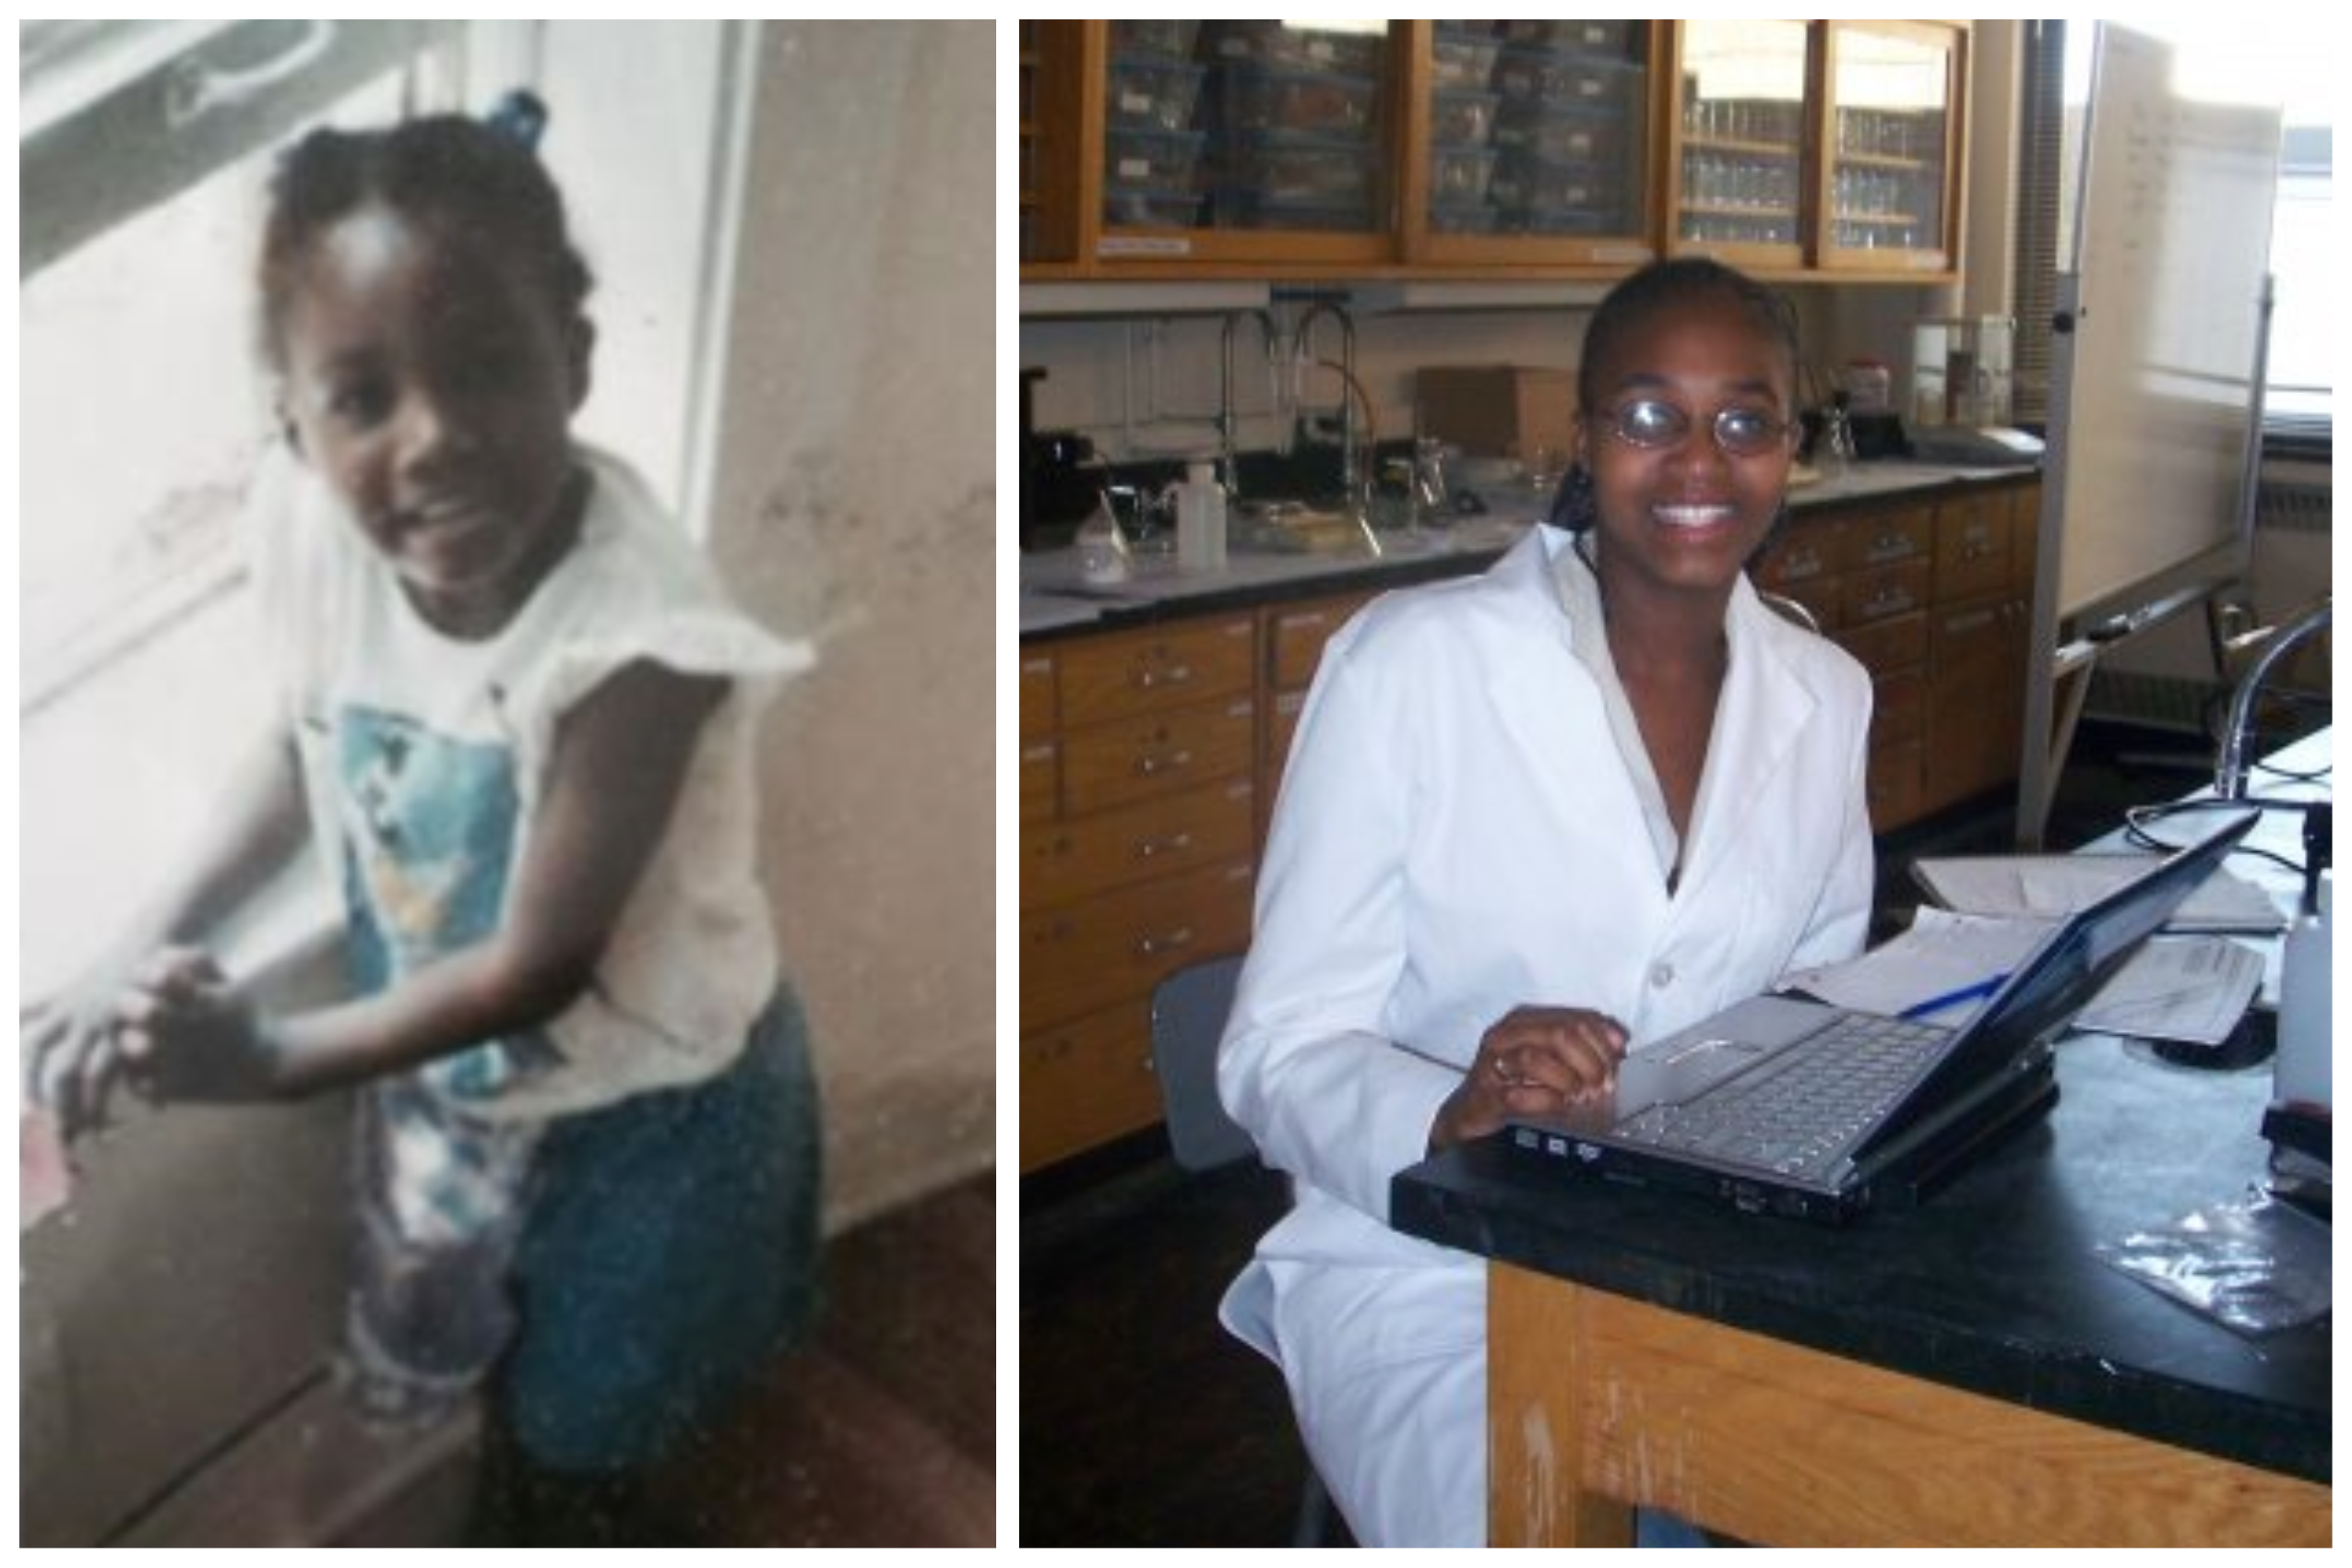 Left, a young child stands next to an open window; right, a young woman sits at a lab table with a laptop in front of her.